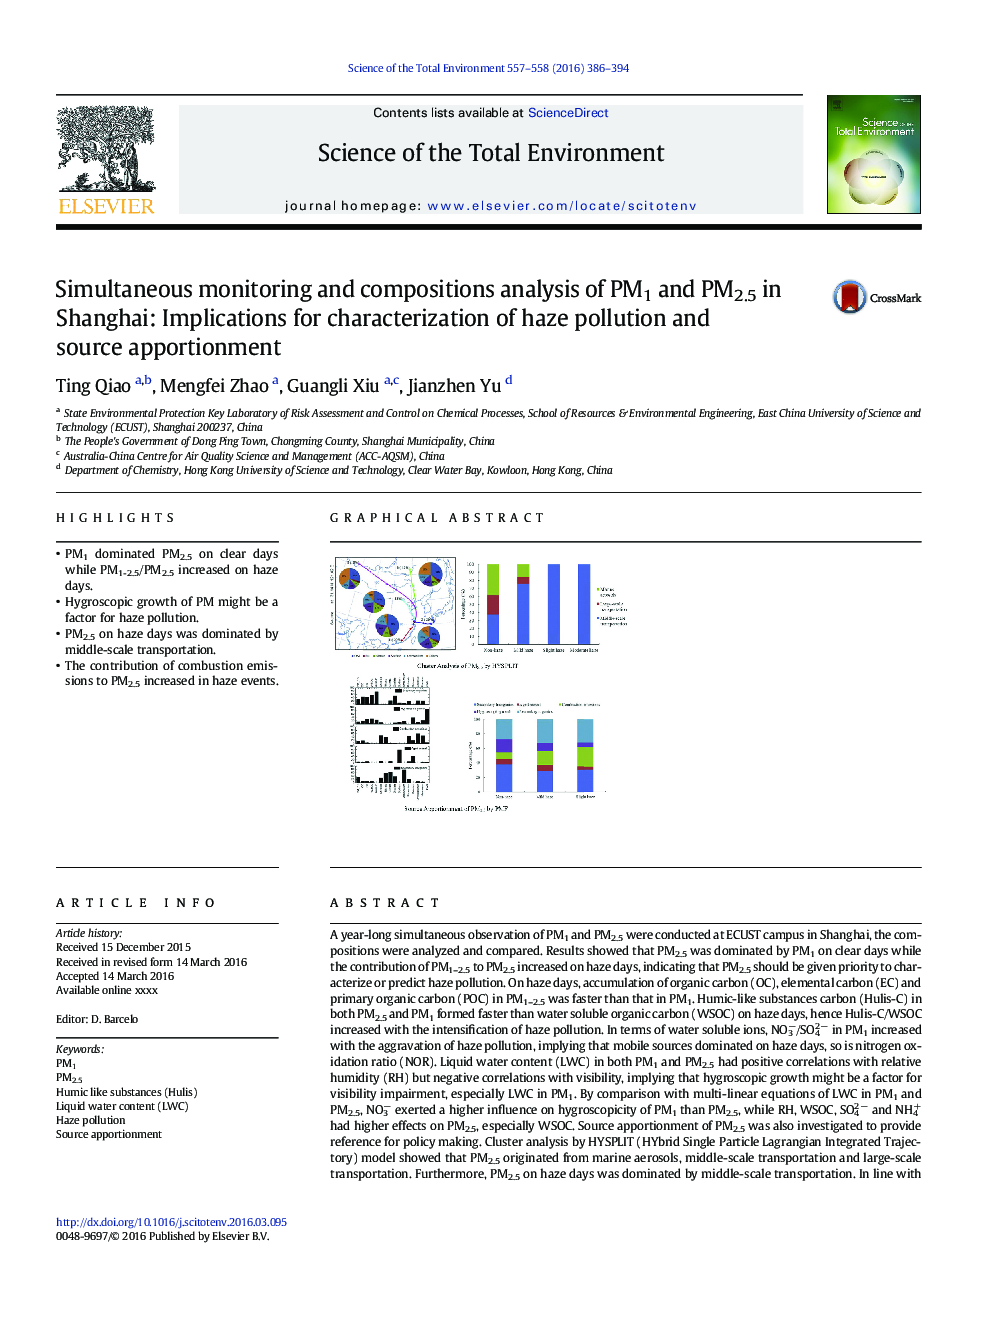 Simultaneous monitoring and compositions analysis of PM1 and PM2.5 in Shanghai: Implications for characterization of haze pollution and source apportionment